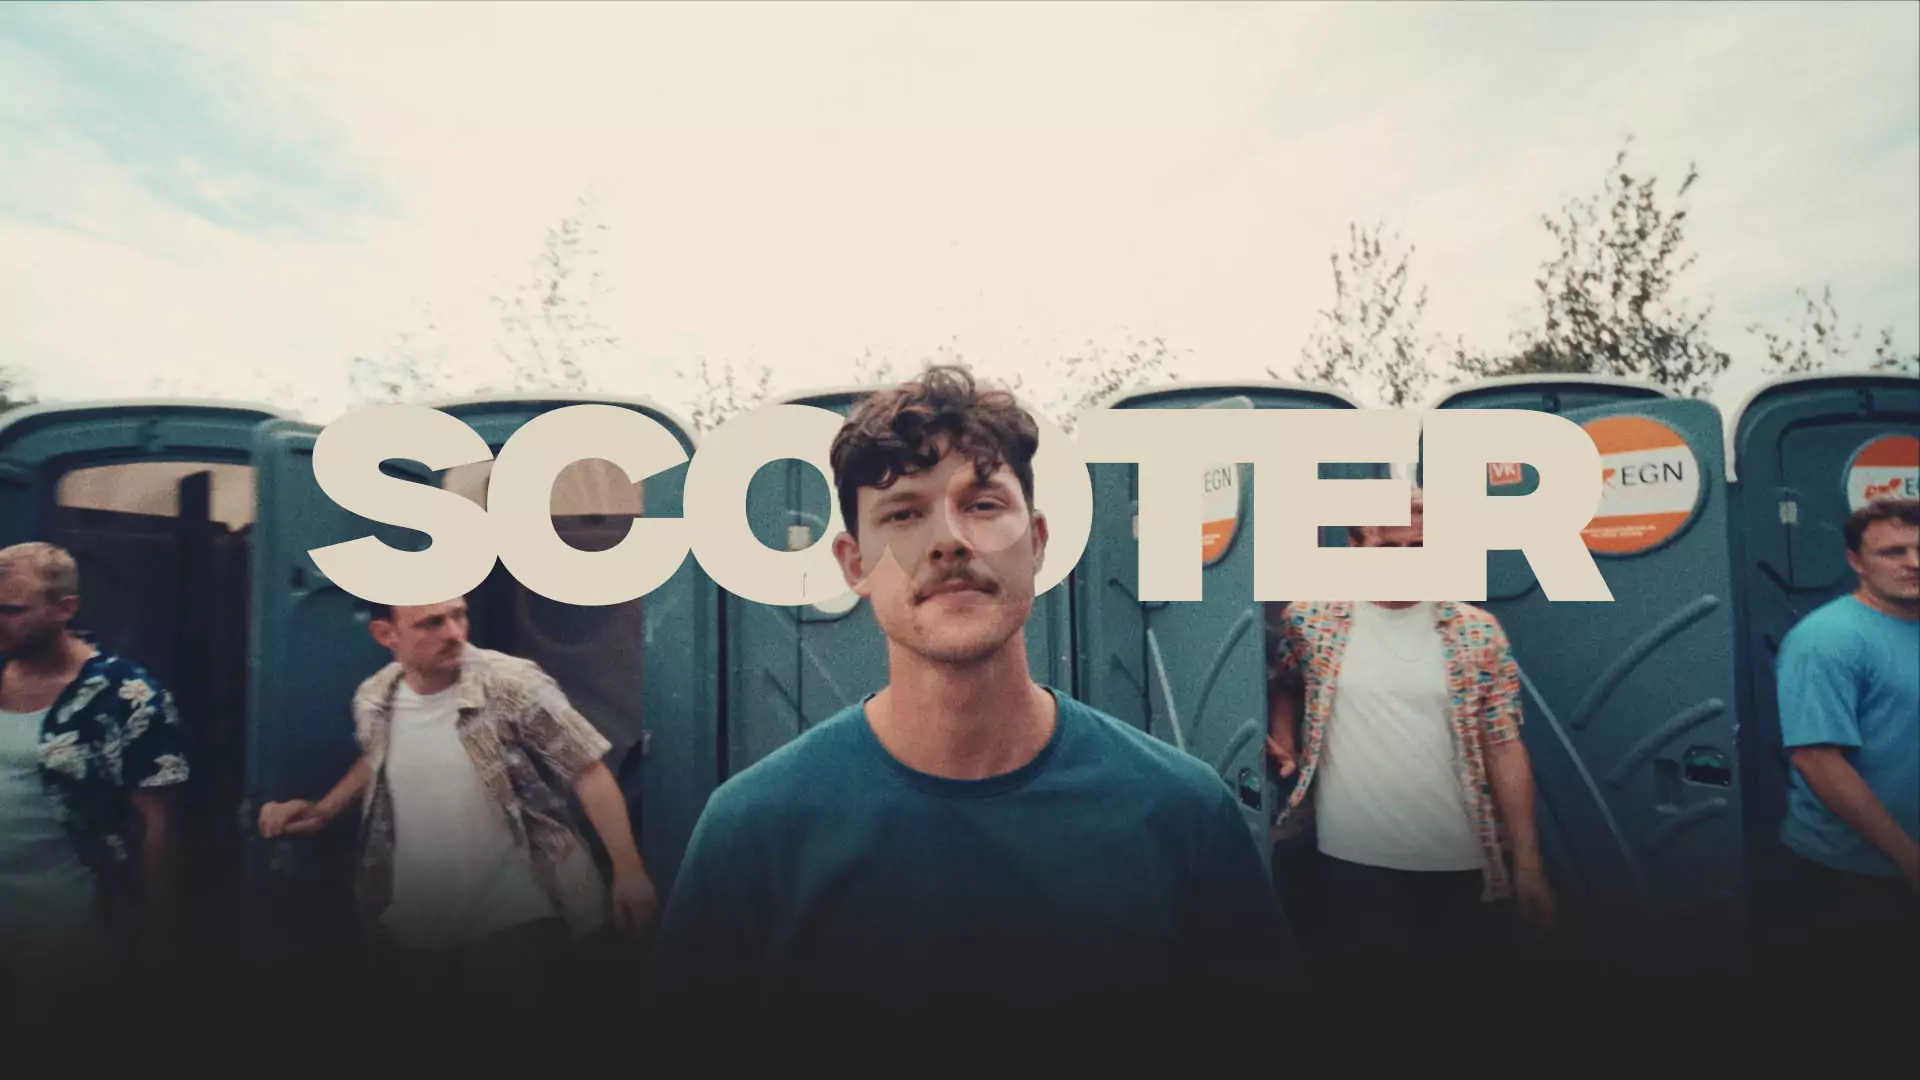 Scooter (Official Video)